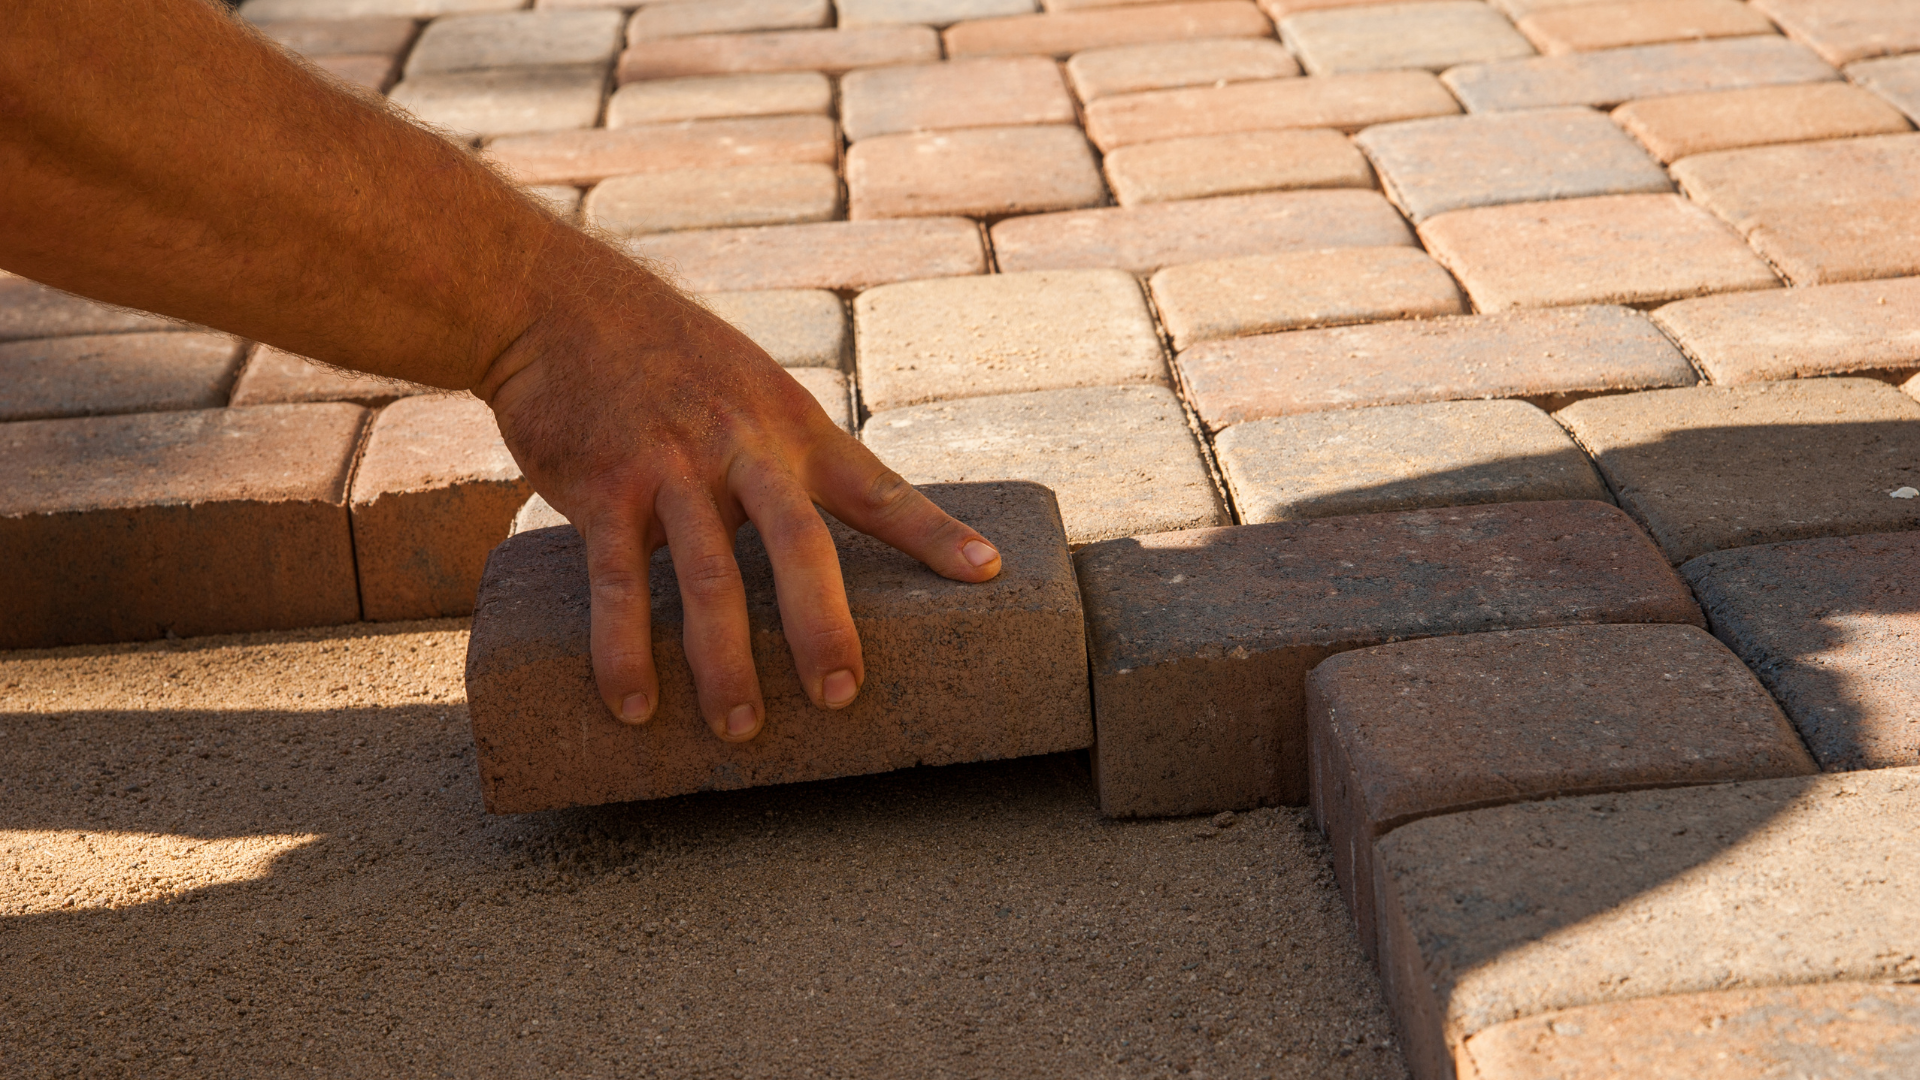 A close-up of a hand placing a brick paver into position on a sandy base, with other pavers already laid out in a pattern beside it.